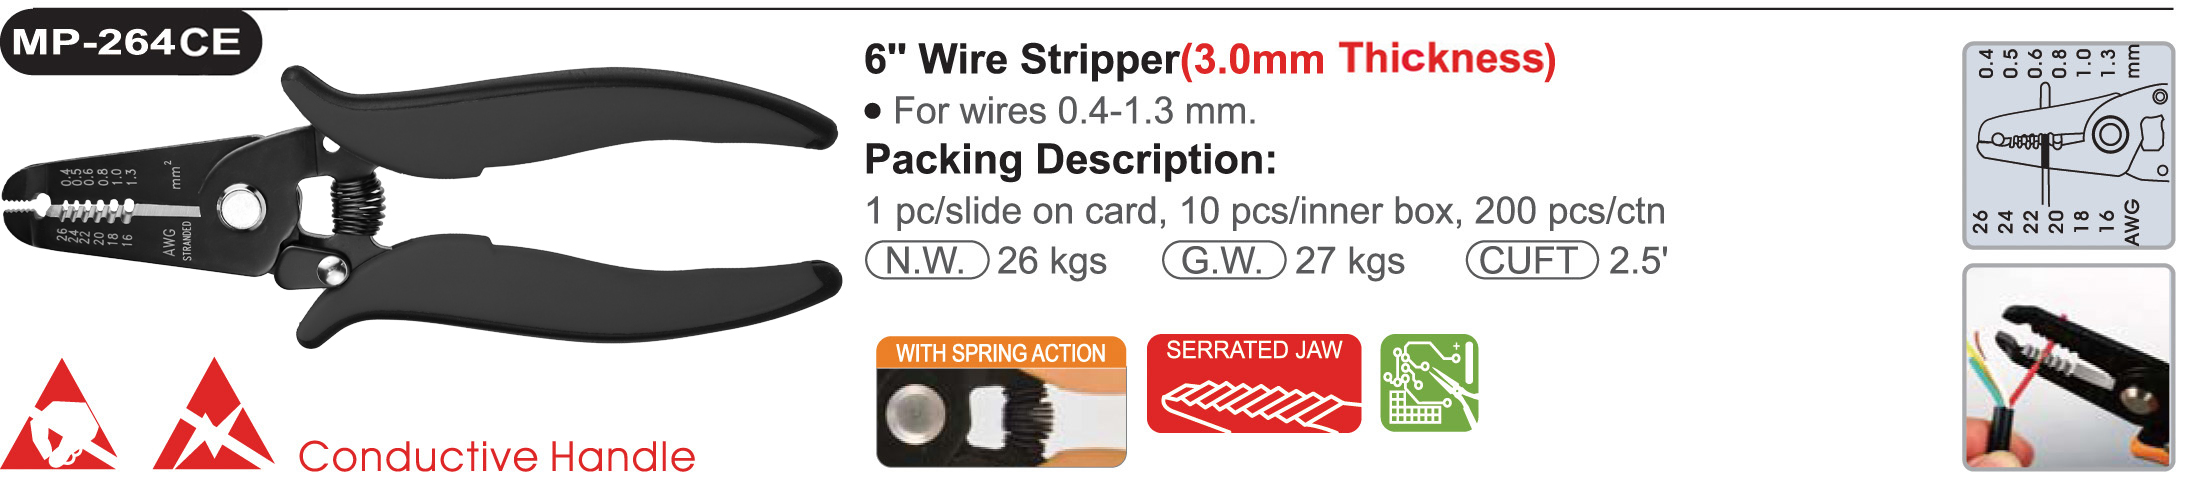 proimages/product/pliers/wire_strippers/ELECTRONICS_WIRE_STRIPPER_ESD/MP-264CE/MP-264CE.jpg